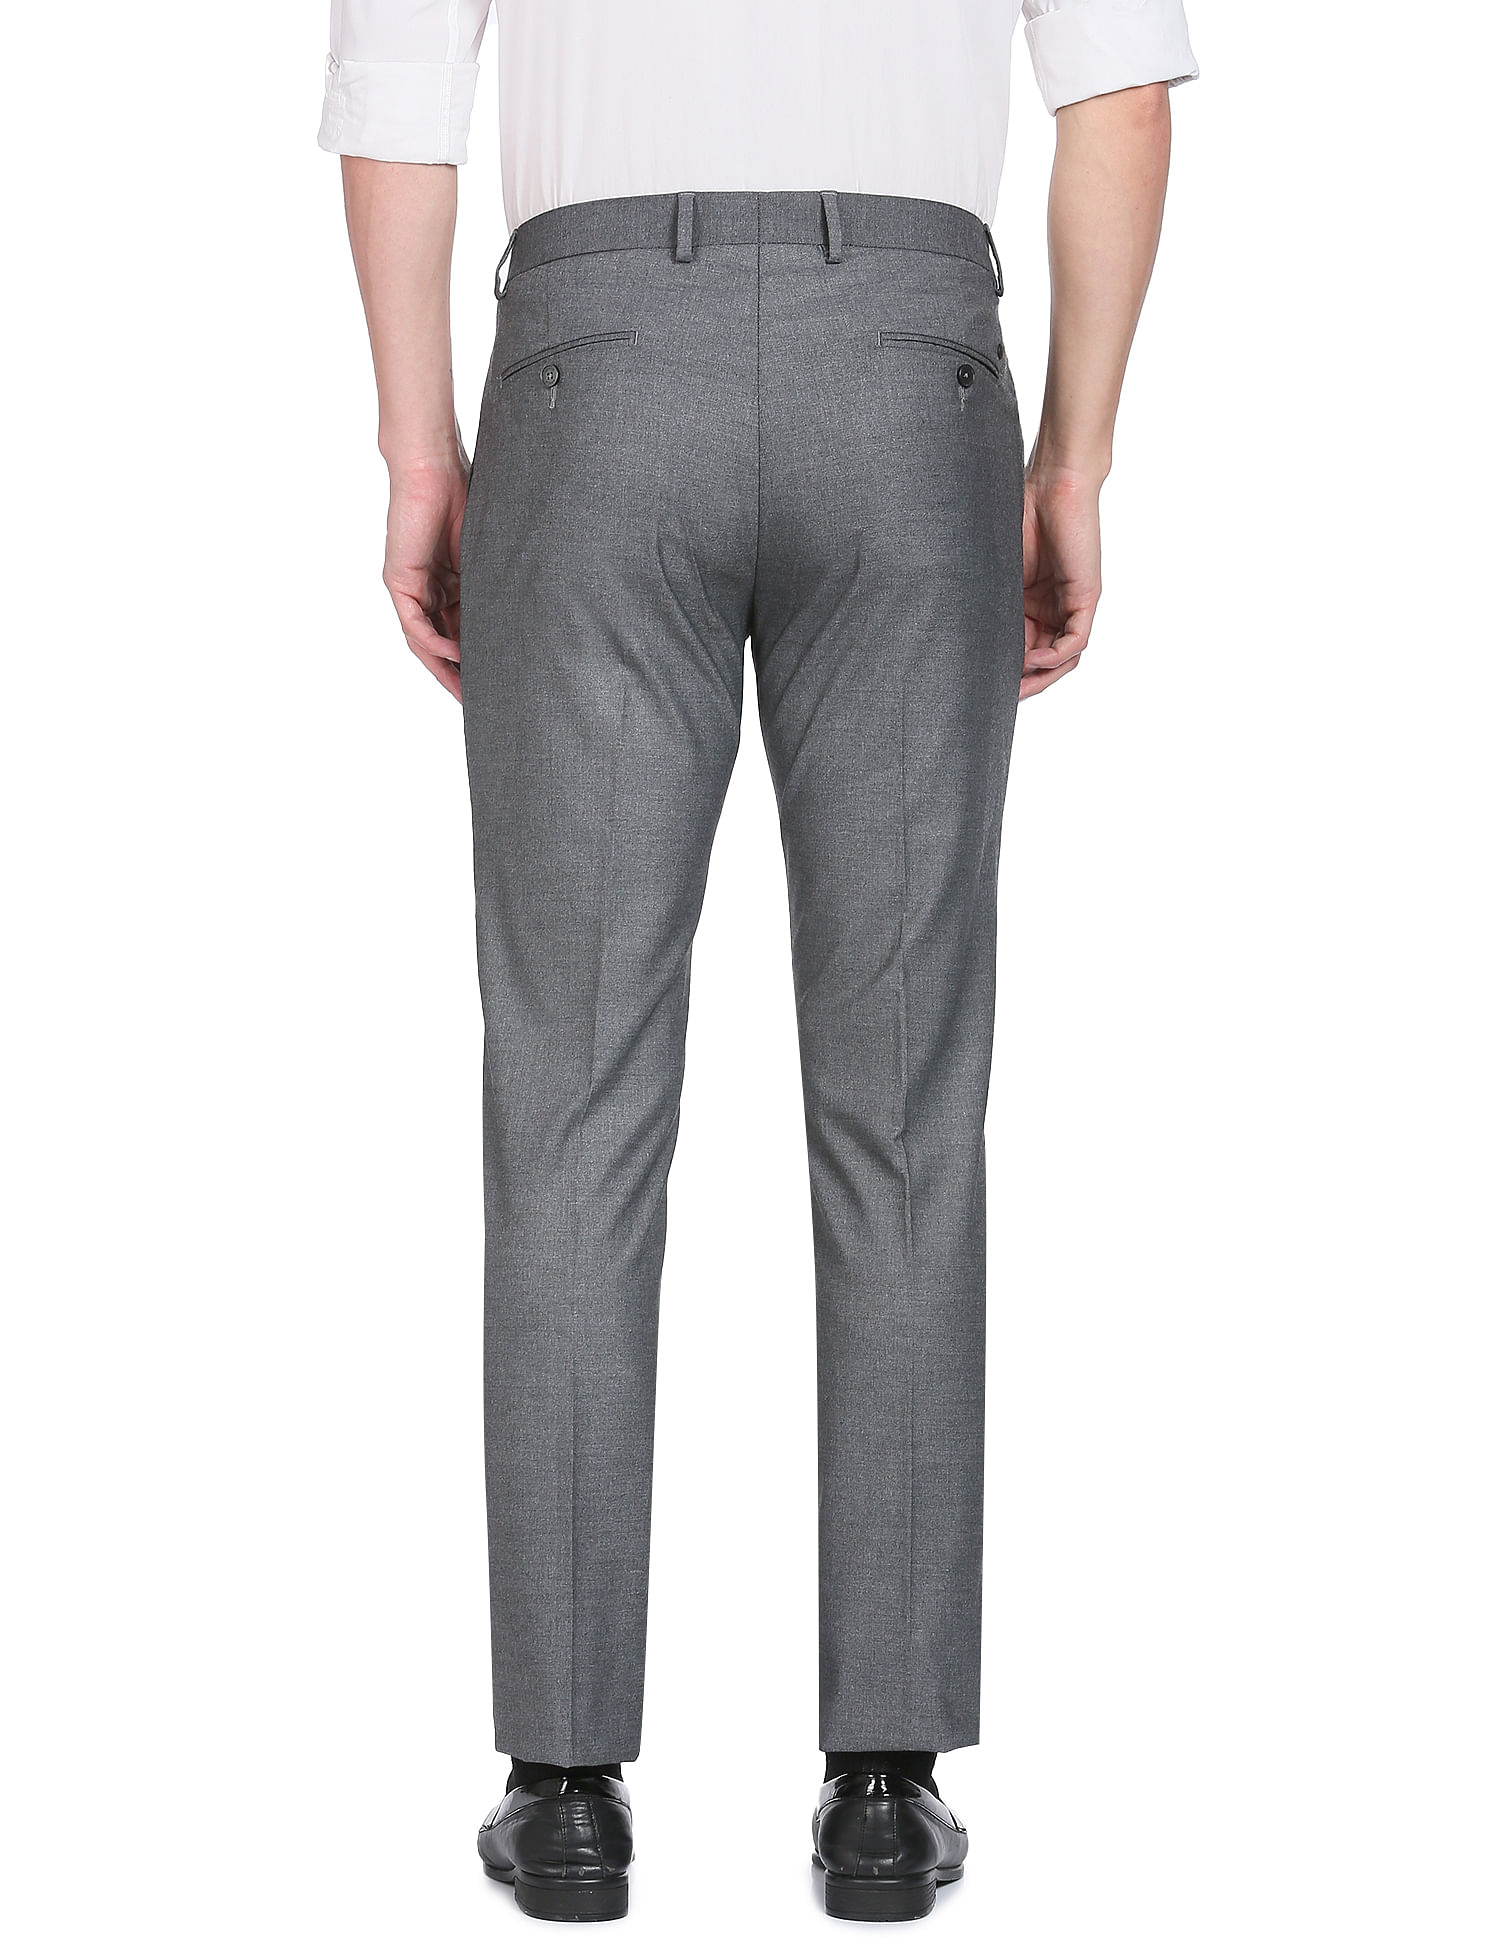 SELECTED HOMME Slim Fit Suit Trousers Light Grey at John Lewis  Partners